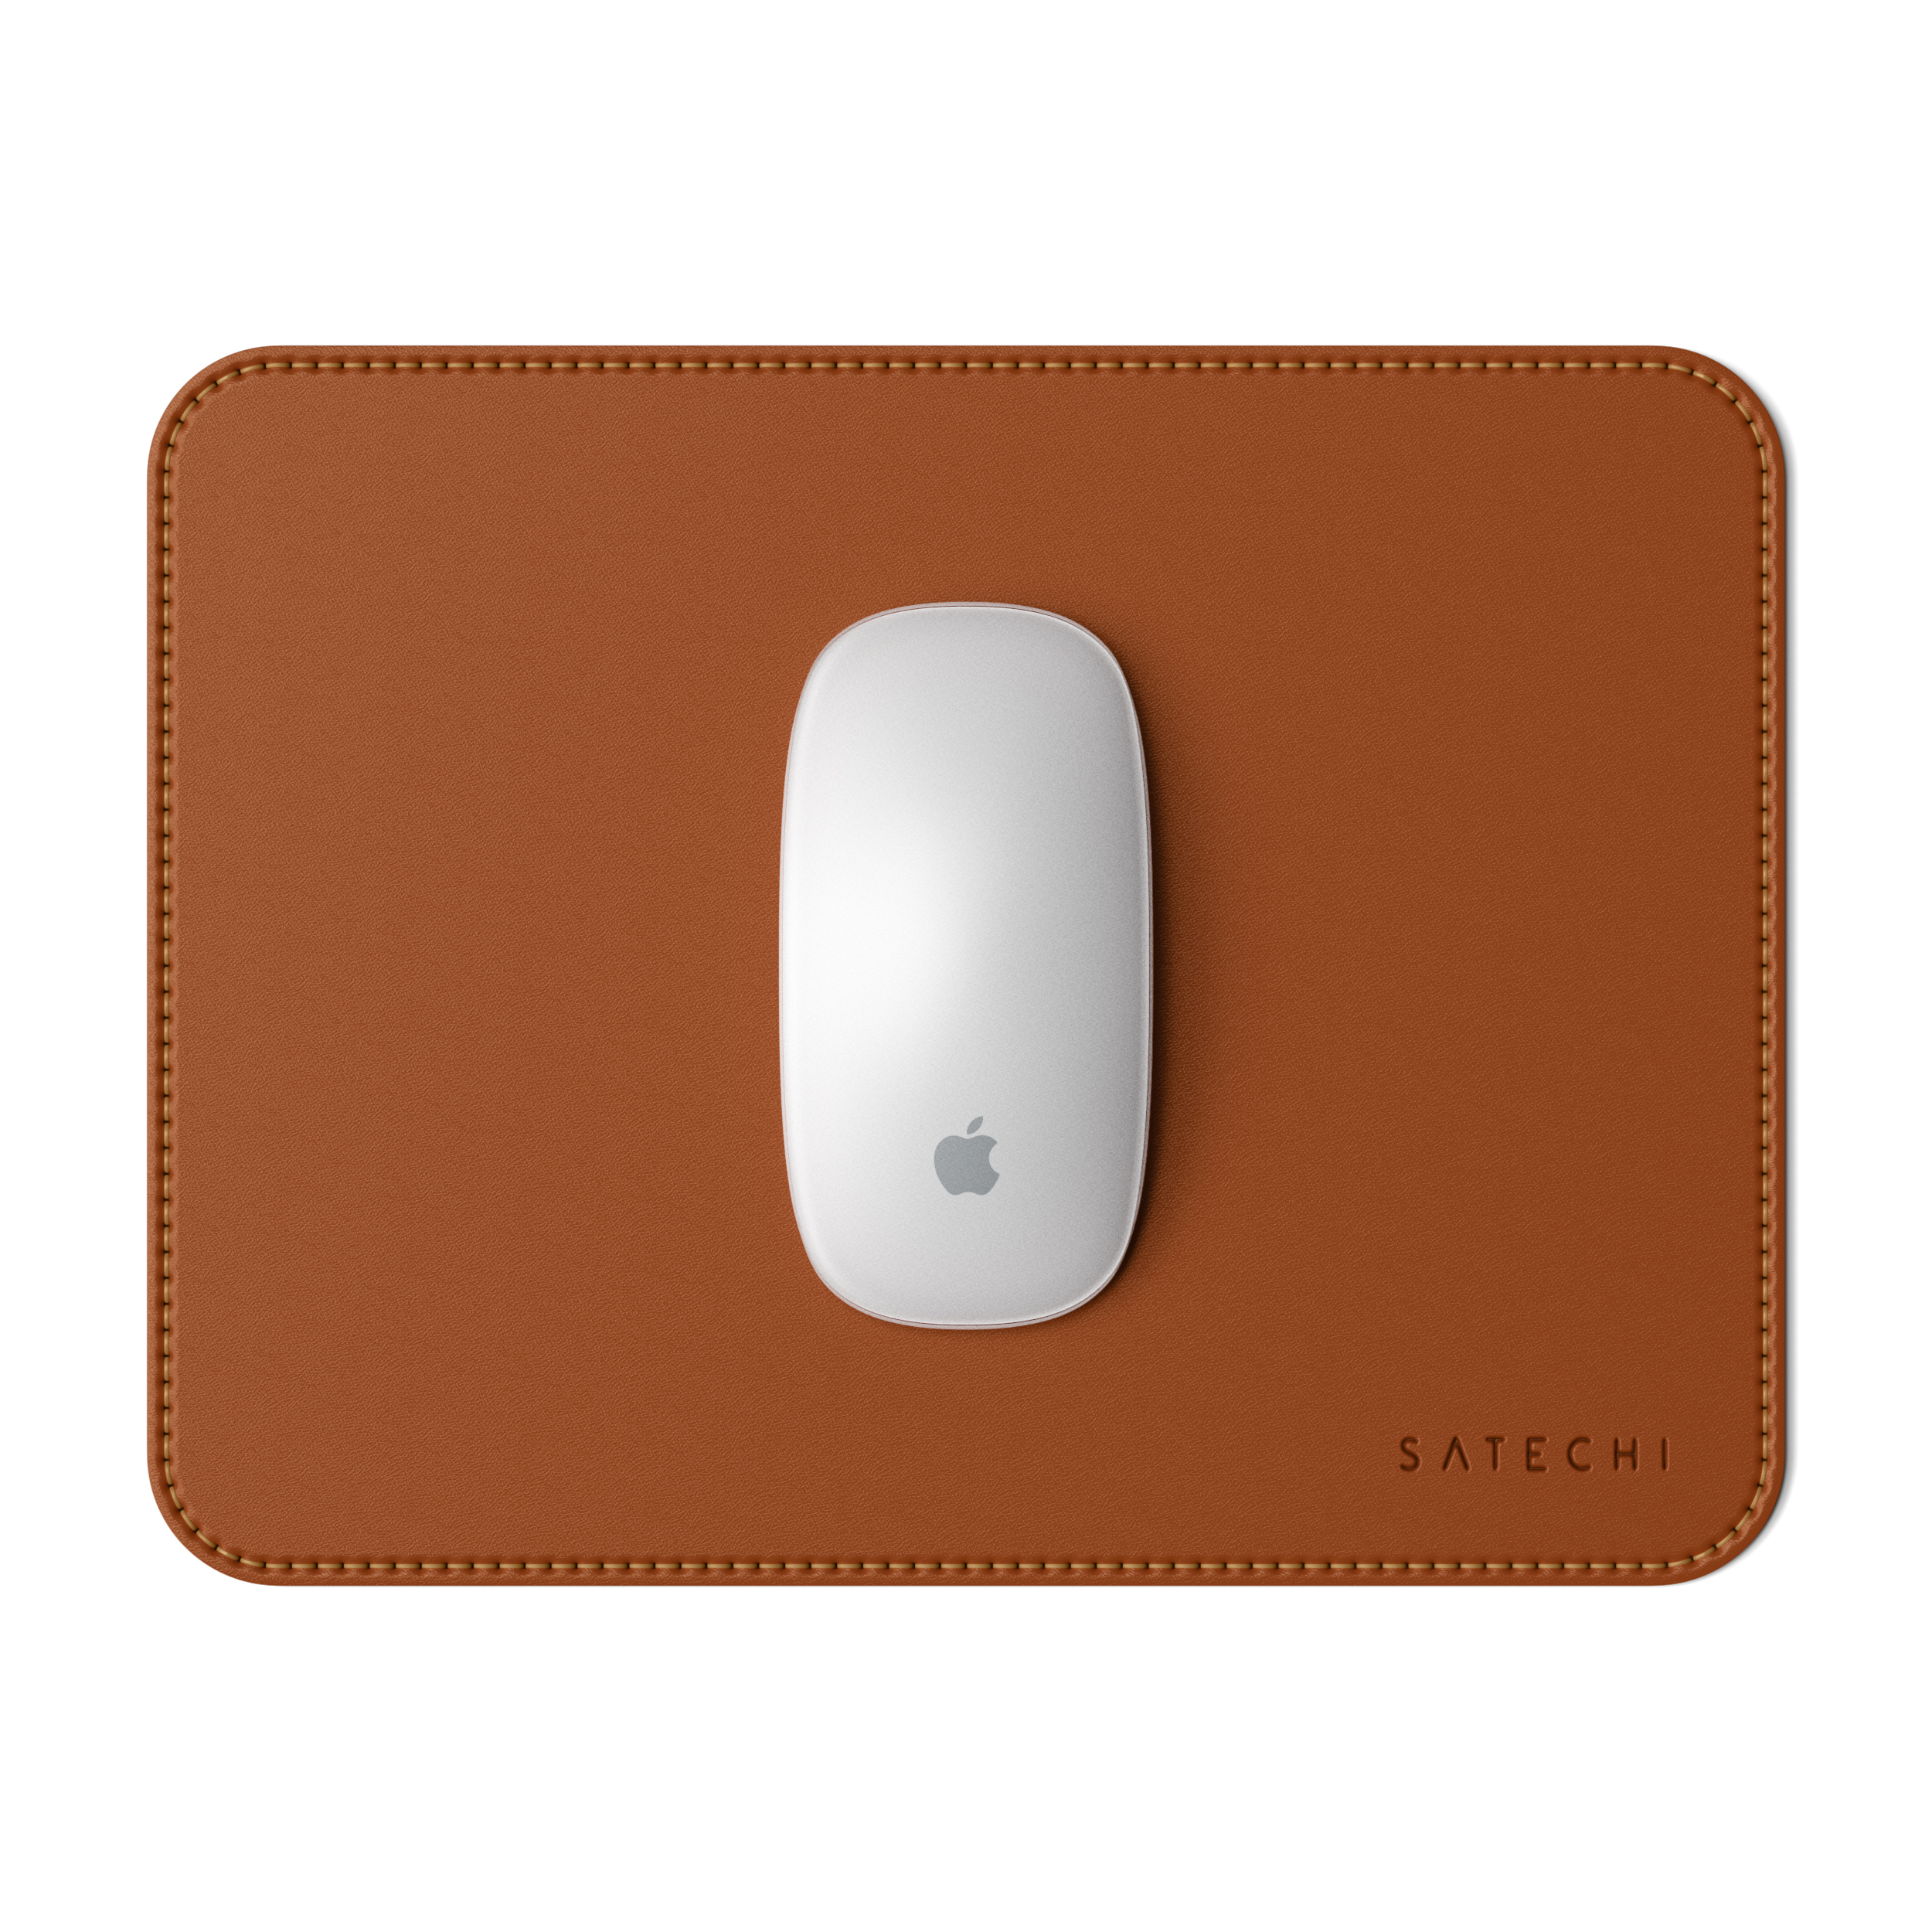 (19 Mousepad Eco-Leather 24,89 Brown SATECHI x cm Pad cm) Mouse -